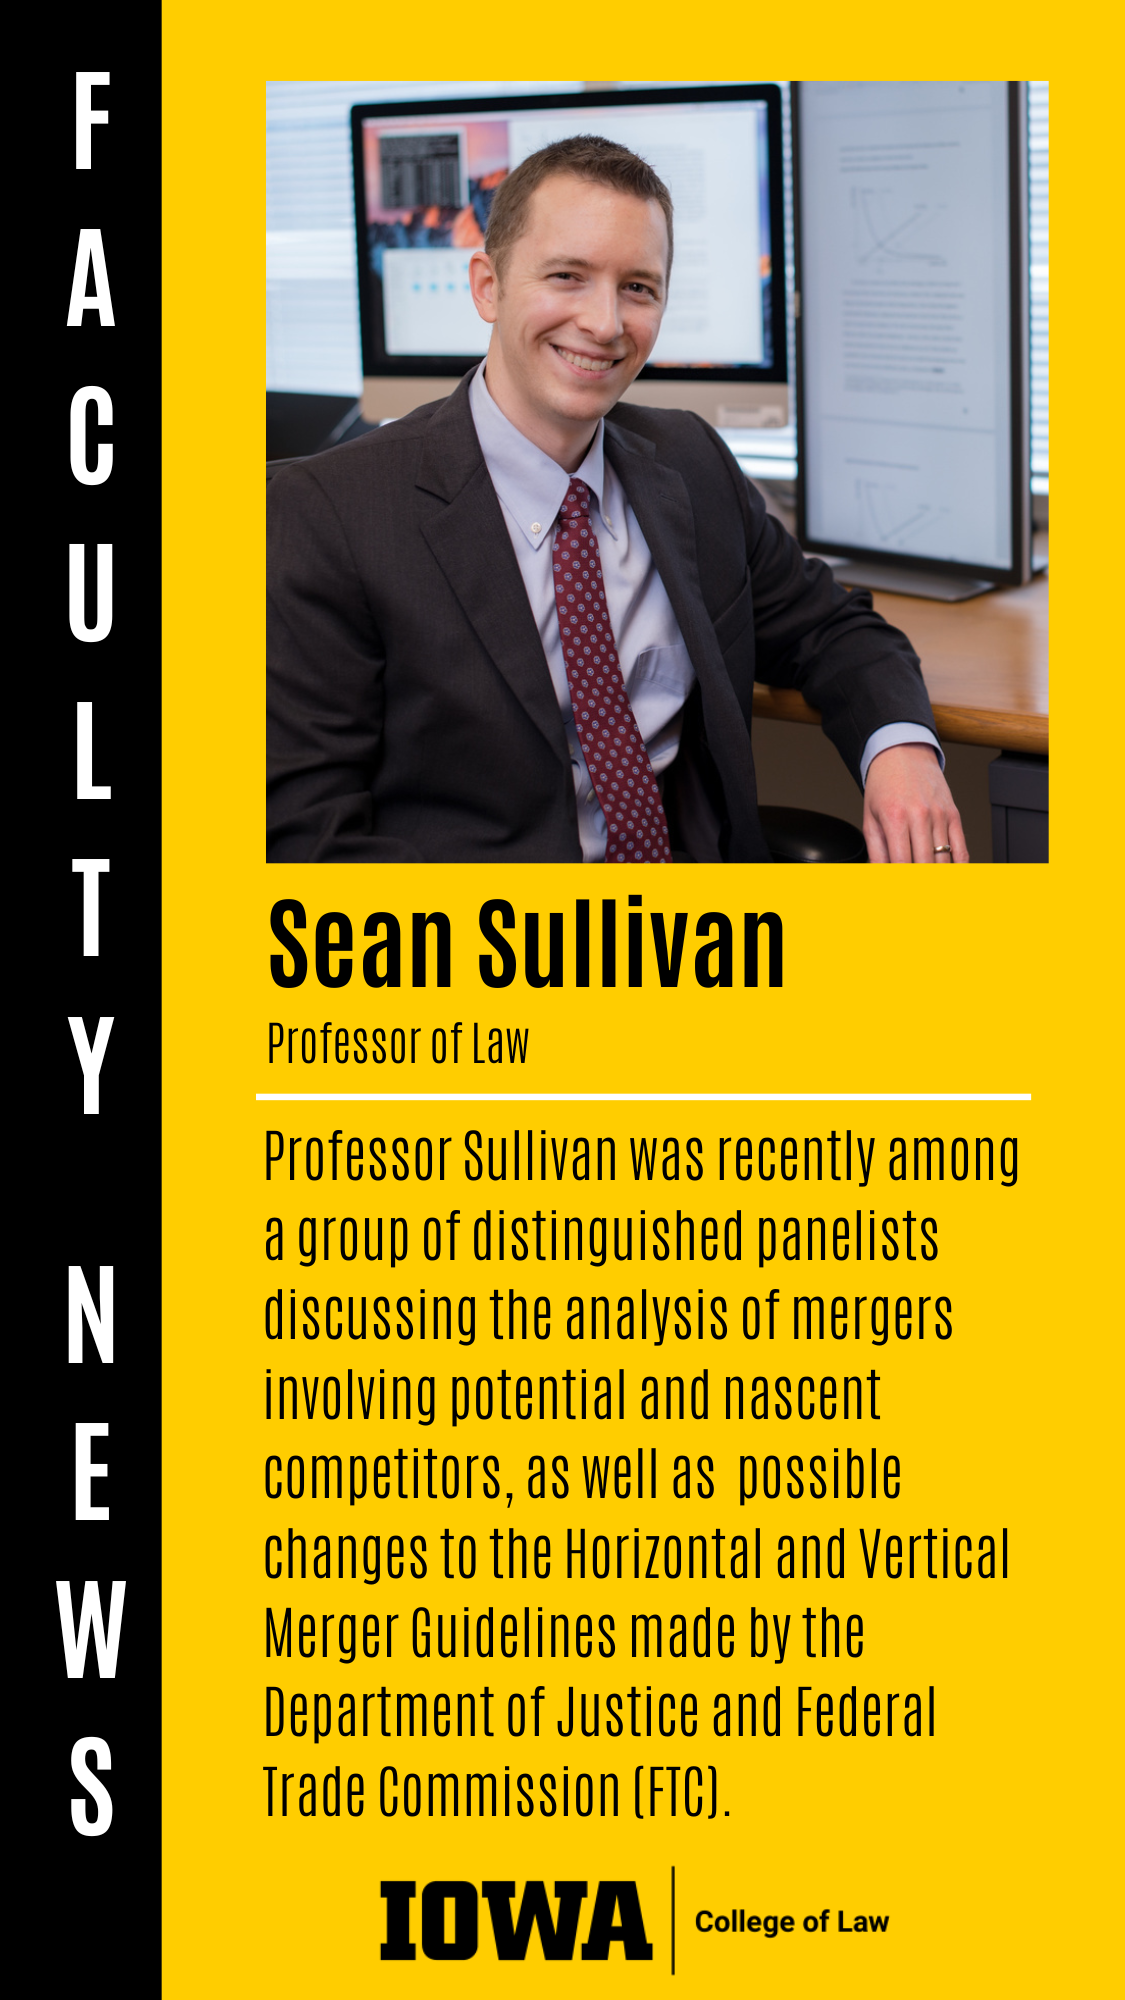 Faculty News - Sean Sullivan (Professor of Law): Professor Sullivan was recently among a group of distinguished panelists discussing the analysis of mergers involving potential and nascent competitors, as well as  possible changes to the Horizontal and Vertical Merger Guidelines made by the Department of Justice and Federal Trade Commission (FTC).